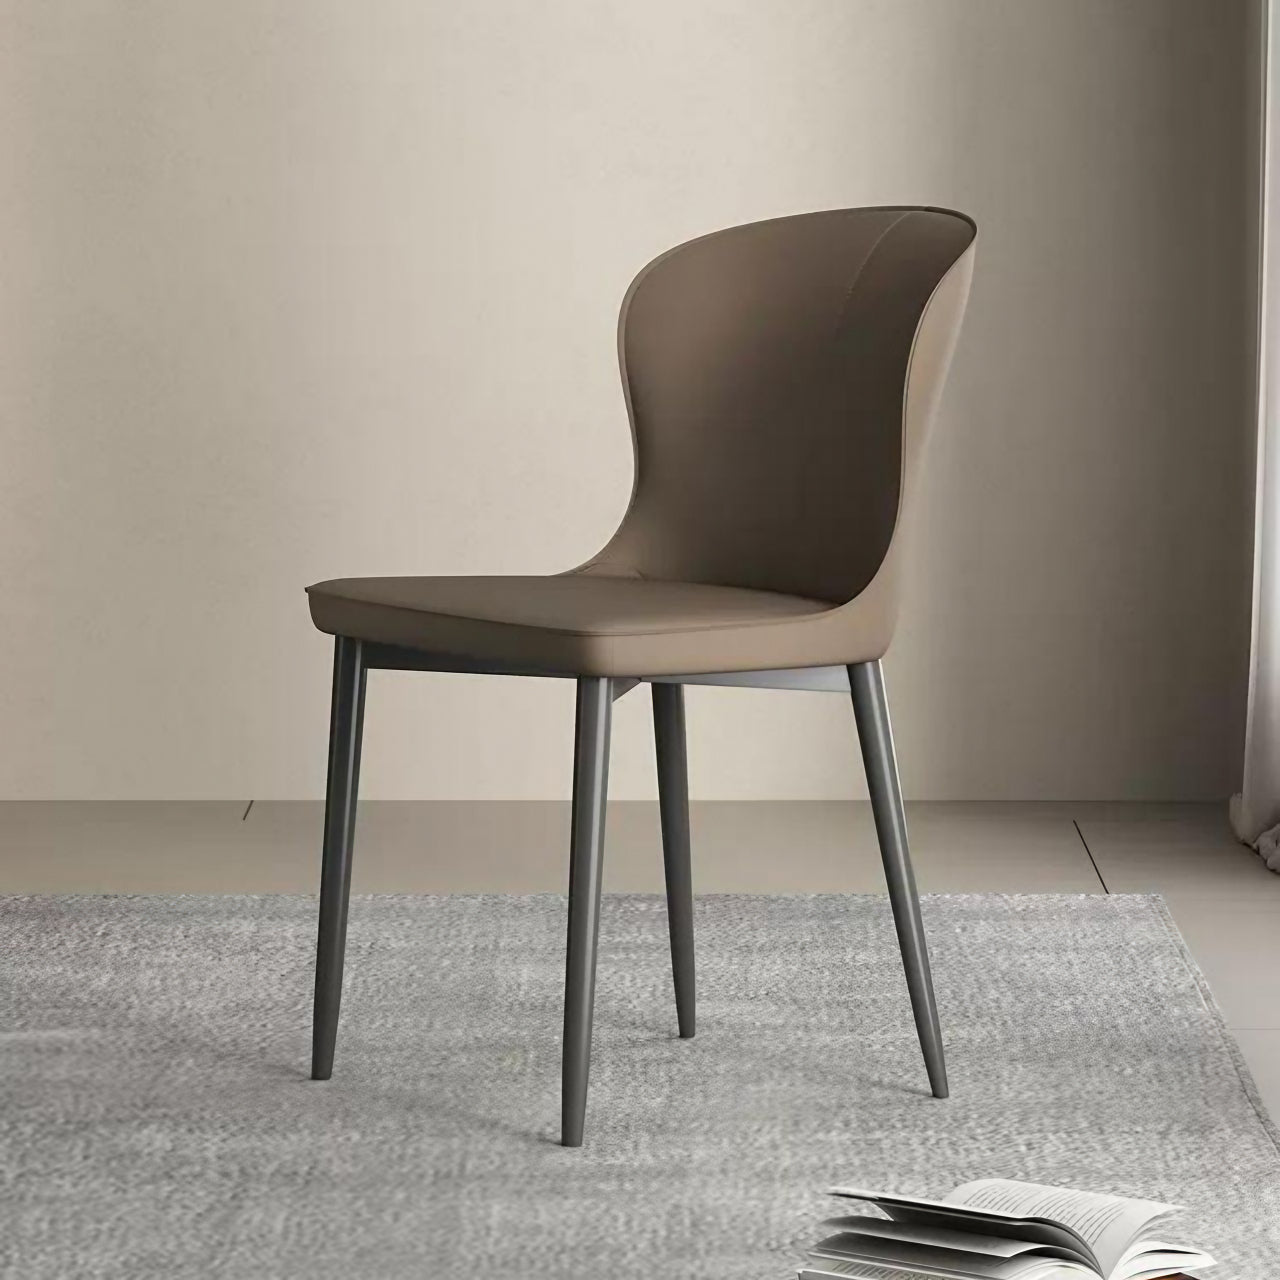 Modern brown leather dining chair with semi-wrapped backrest in a contemporary minimalist design